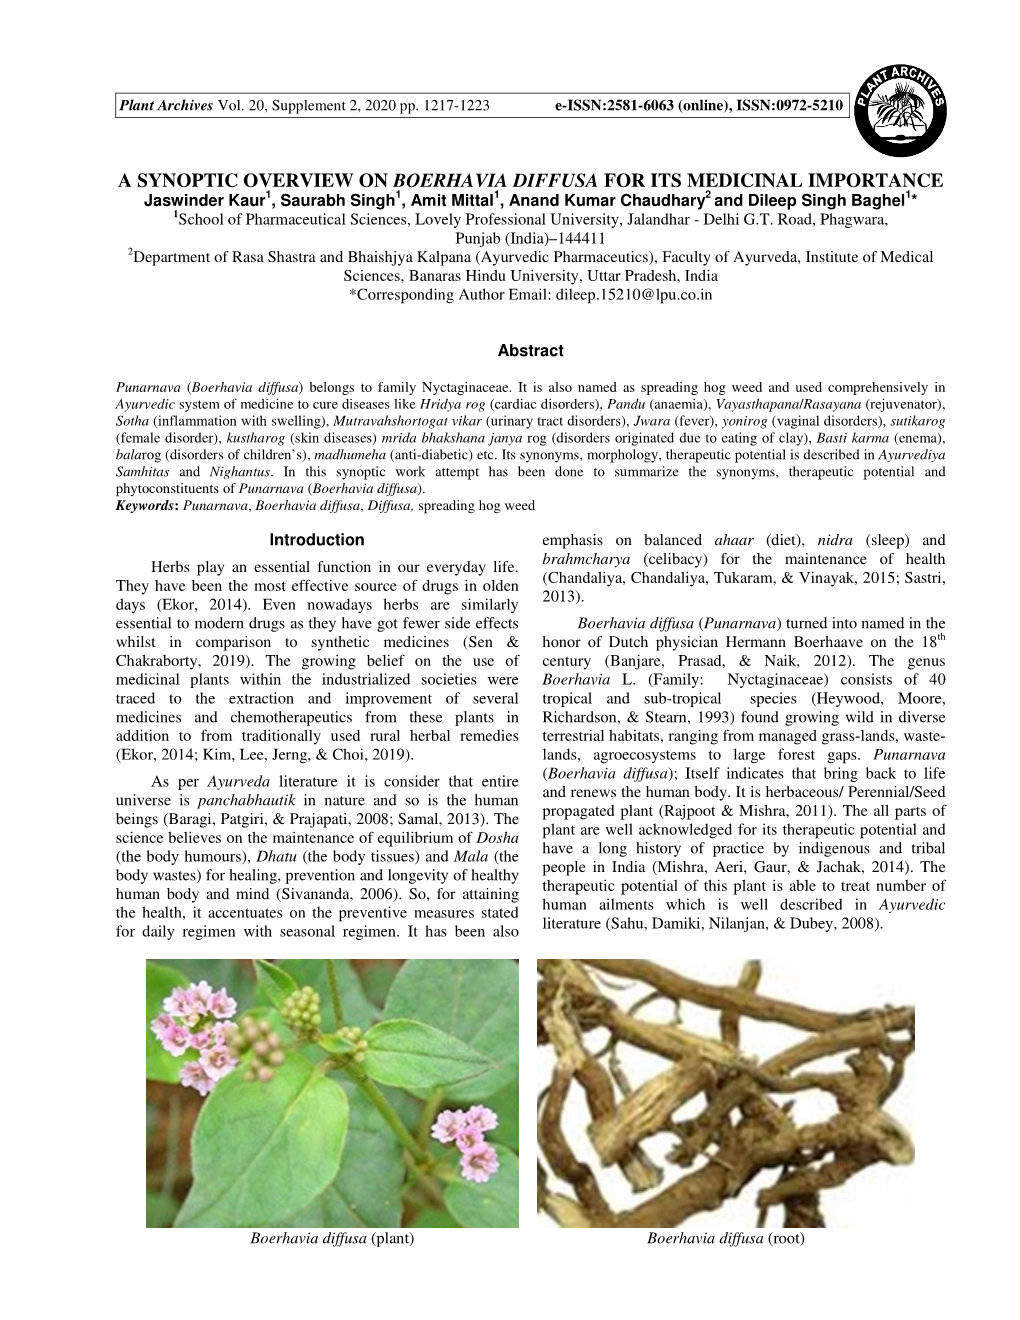 A Synoptic Overview on Boerhavia Diffusa for Its